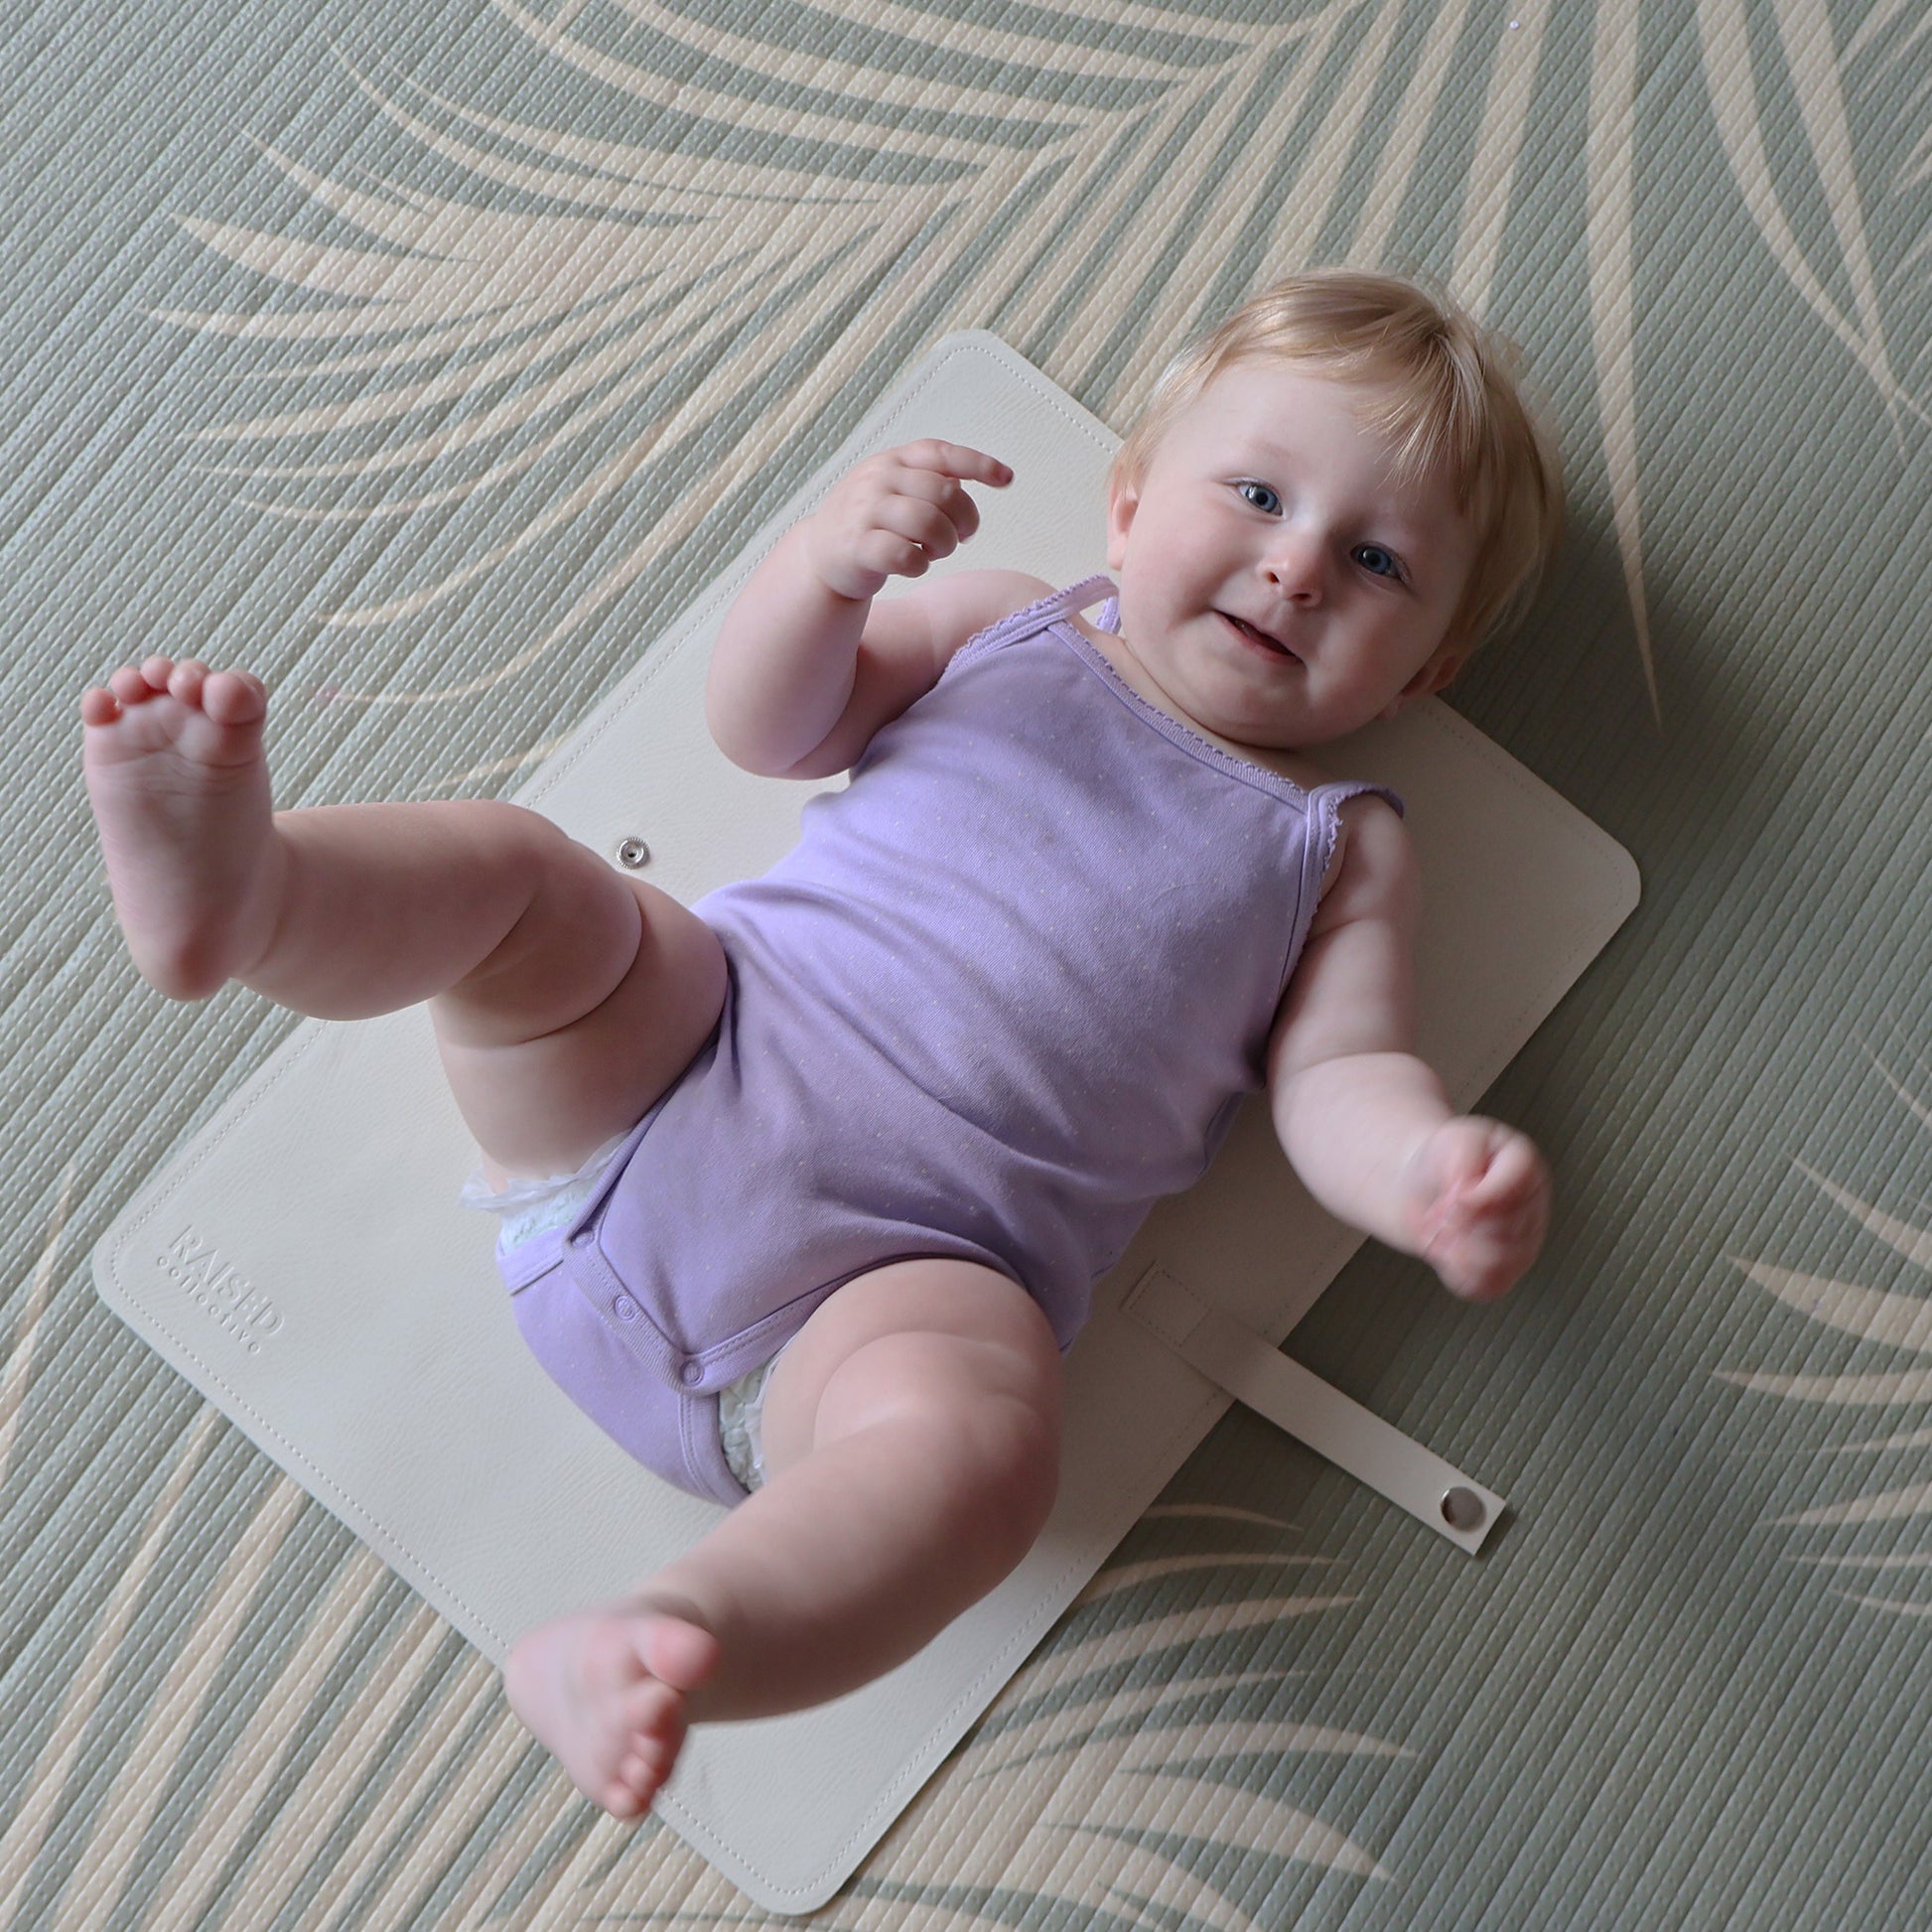 Baby change mat in off white, minimal branding, easy to transport and wipe clean